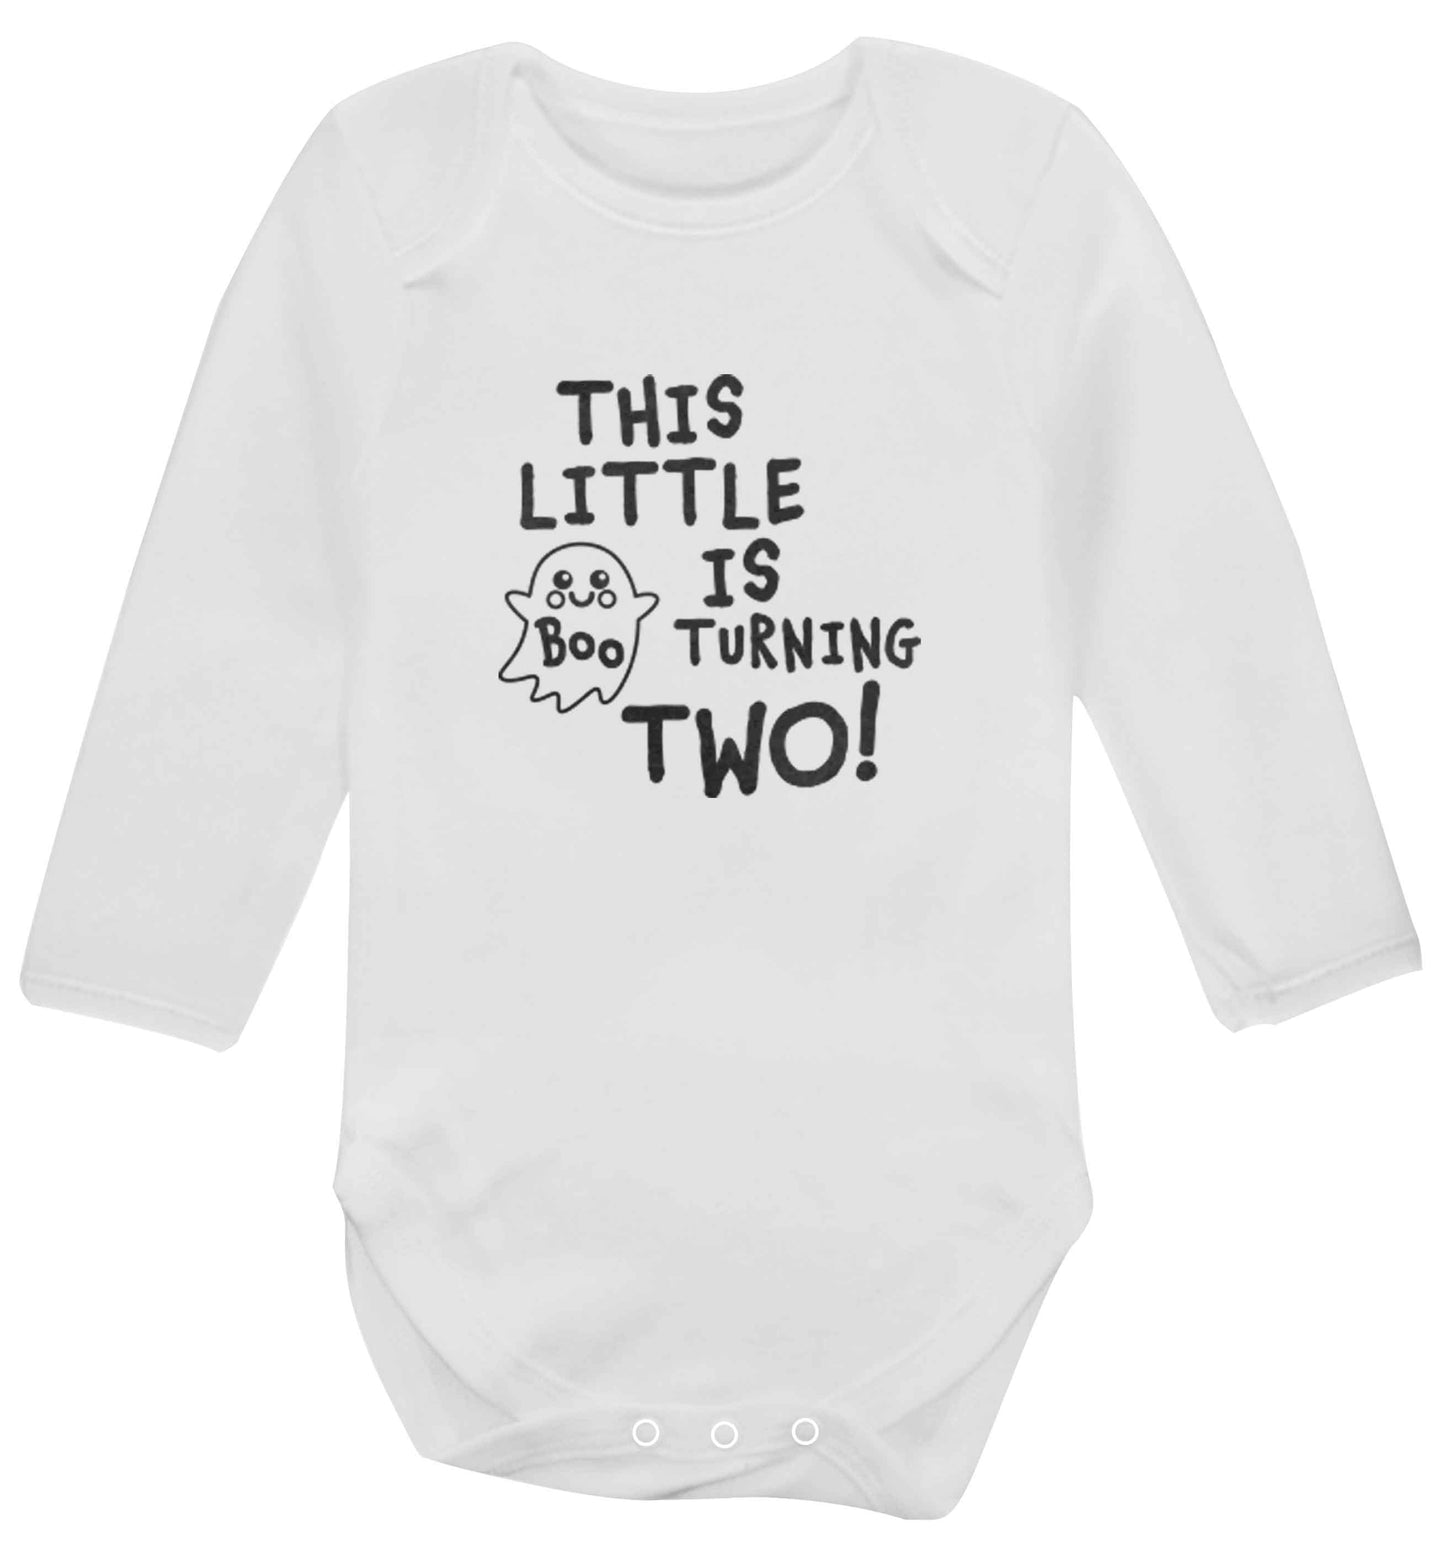 This little boo is turning two baby vest long sleeved white 6-12 months